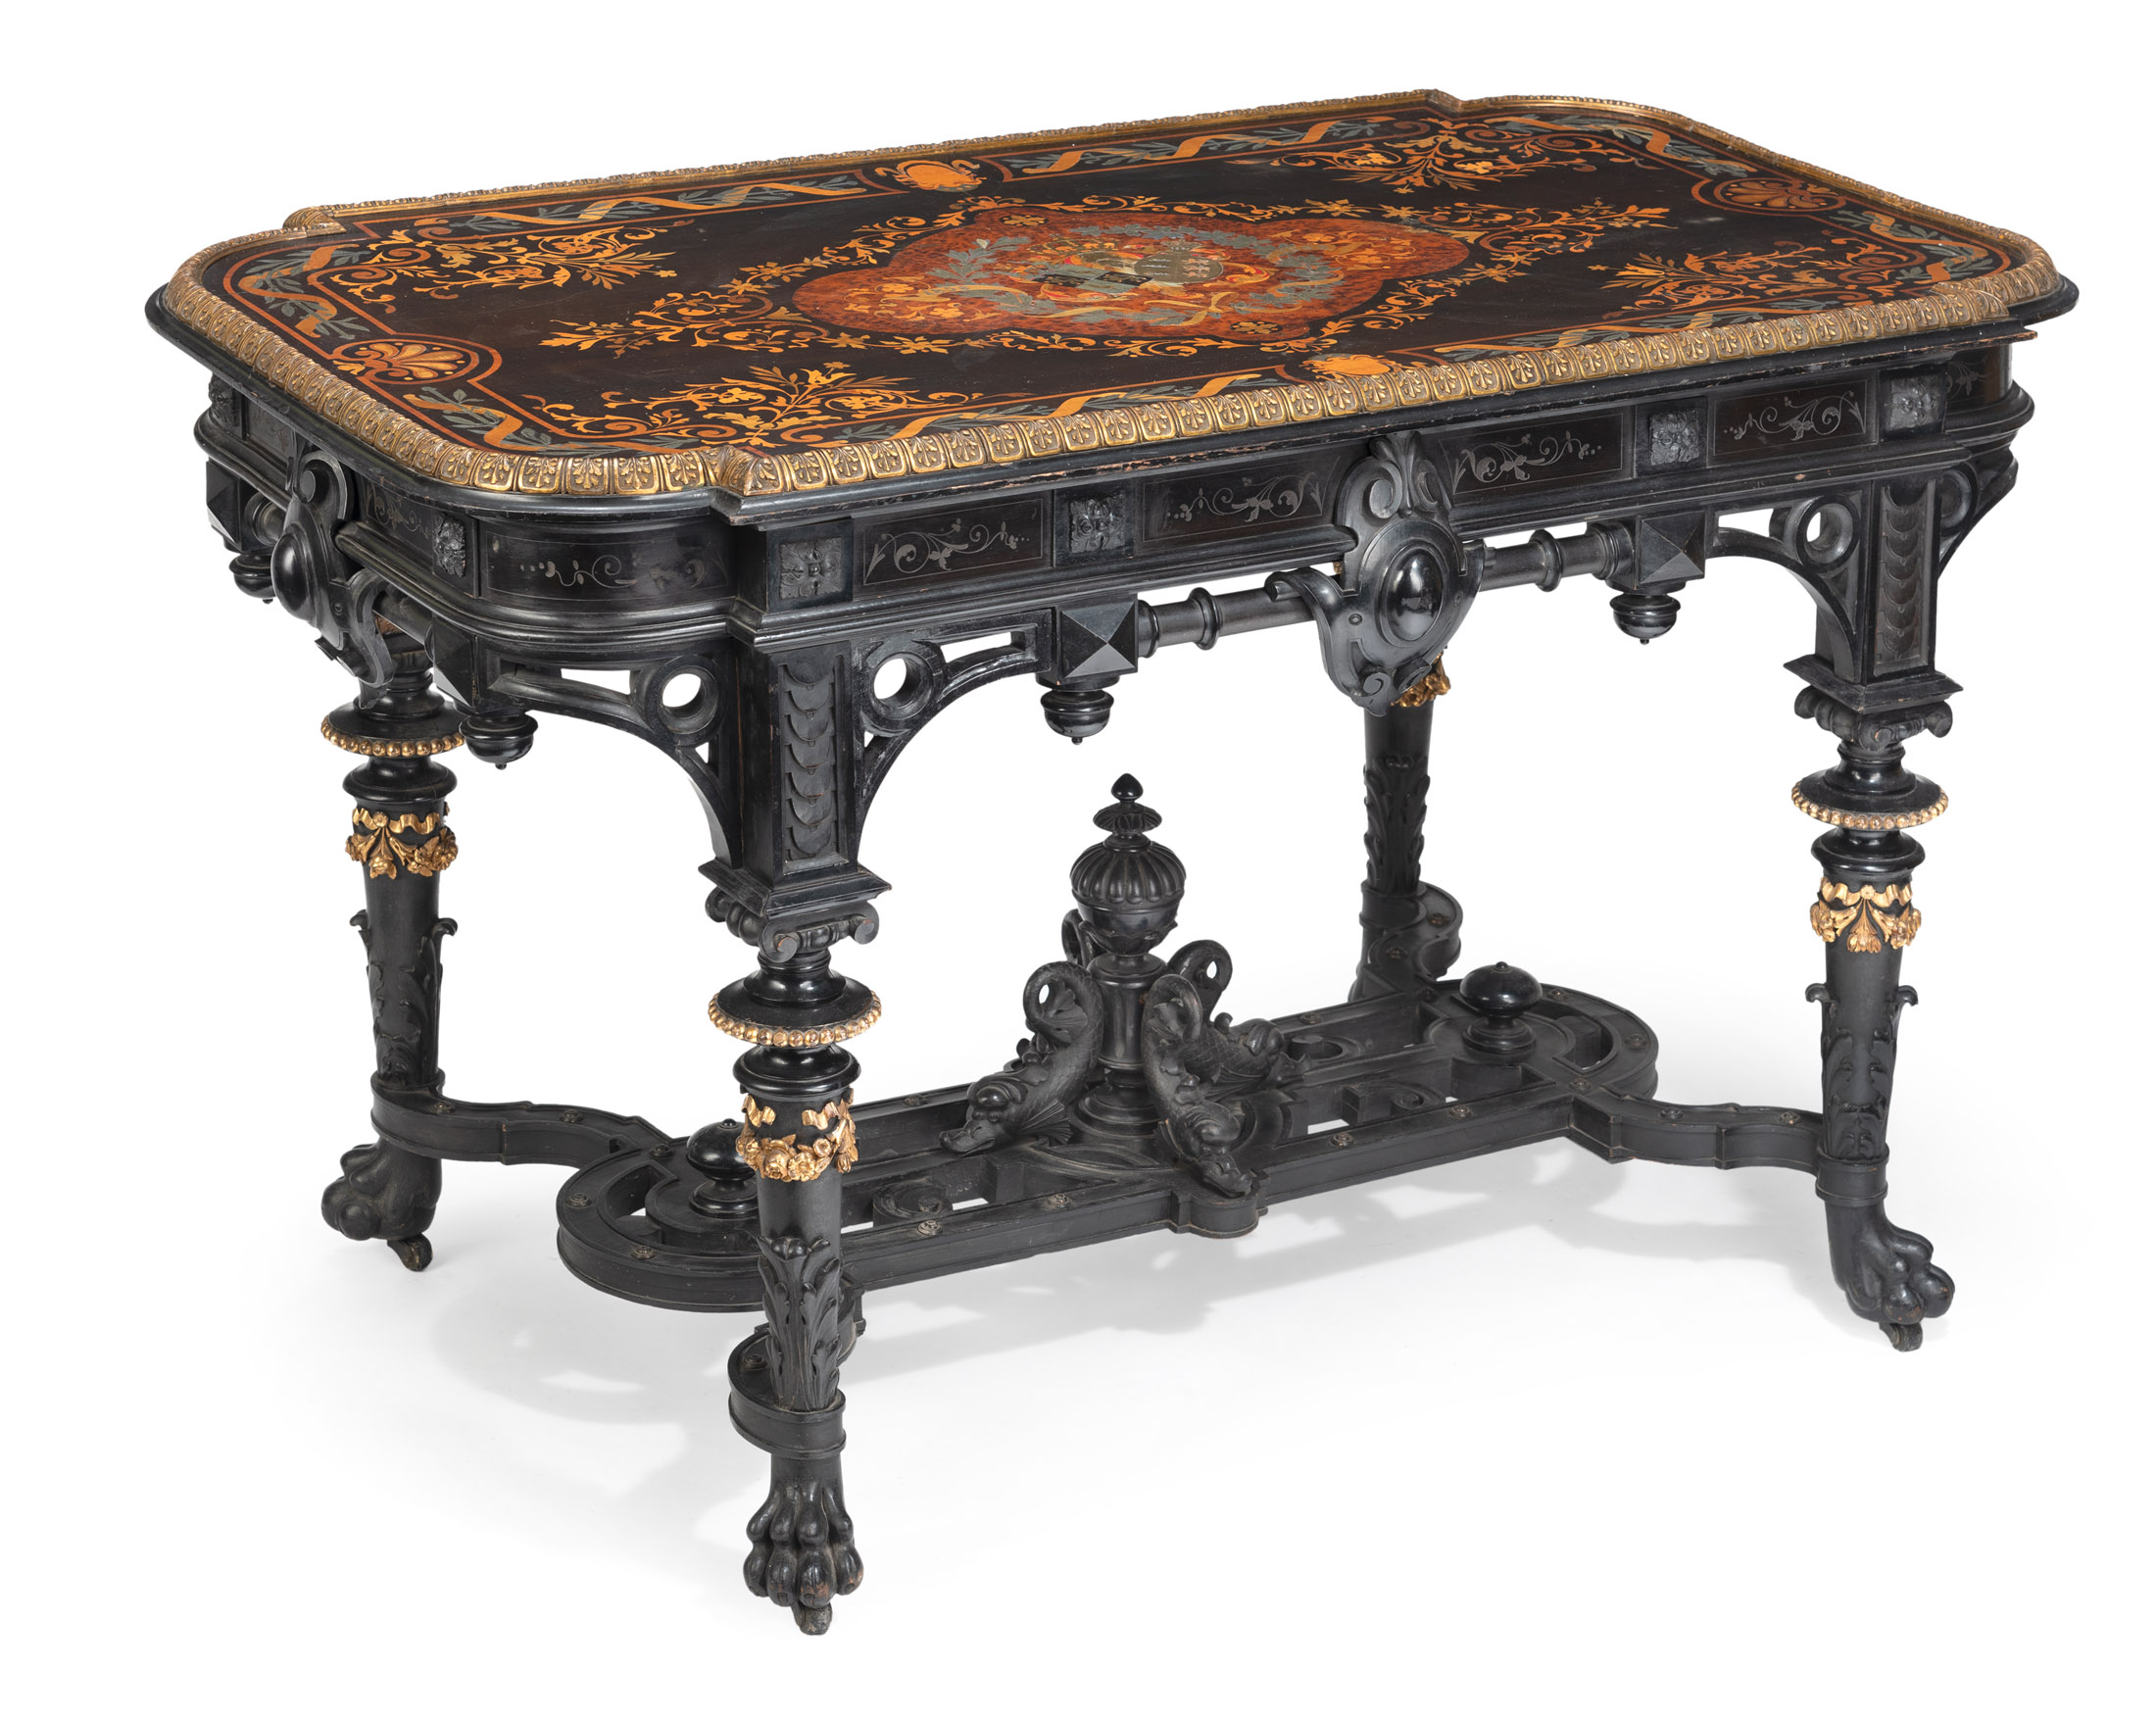 Magnificent centre table with the alliance coat of arms of Agnes von Württemberg and Prince Heinric